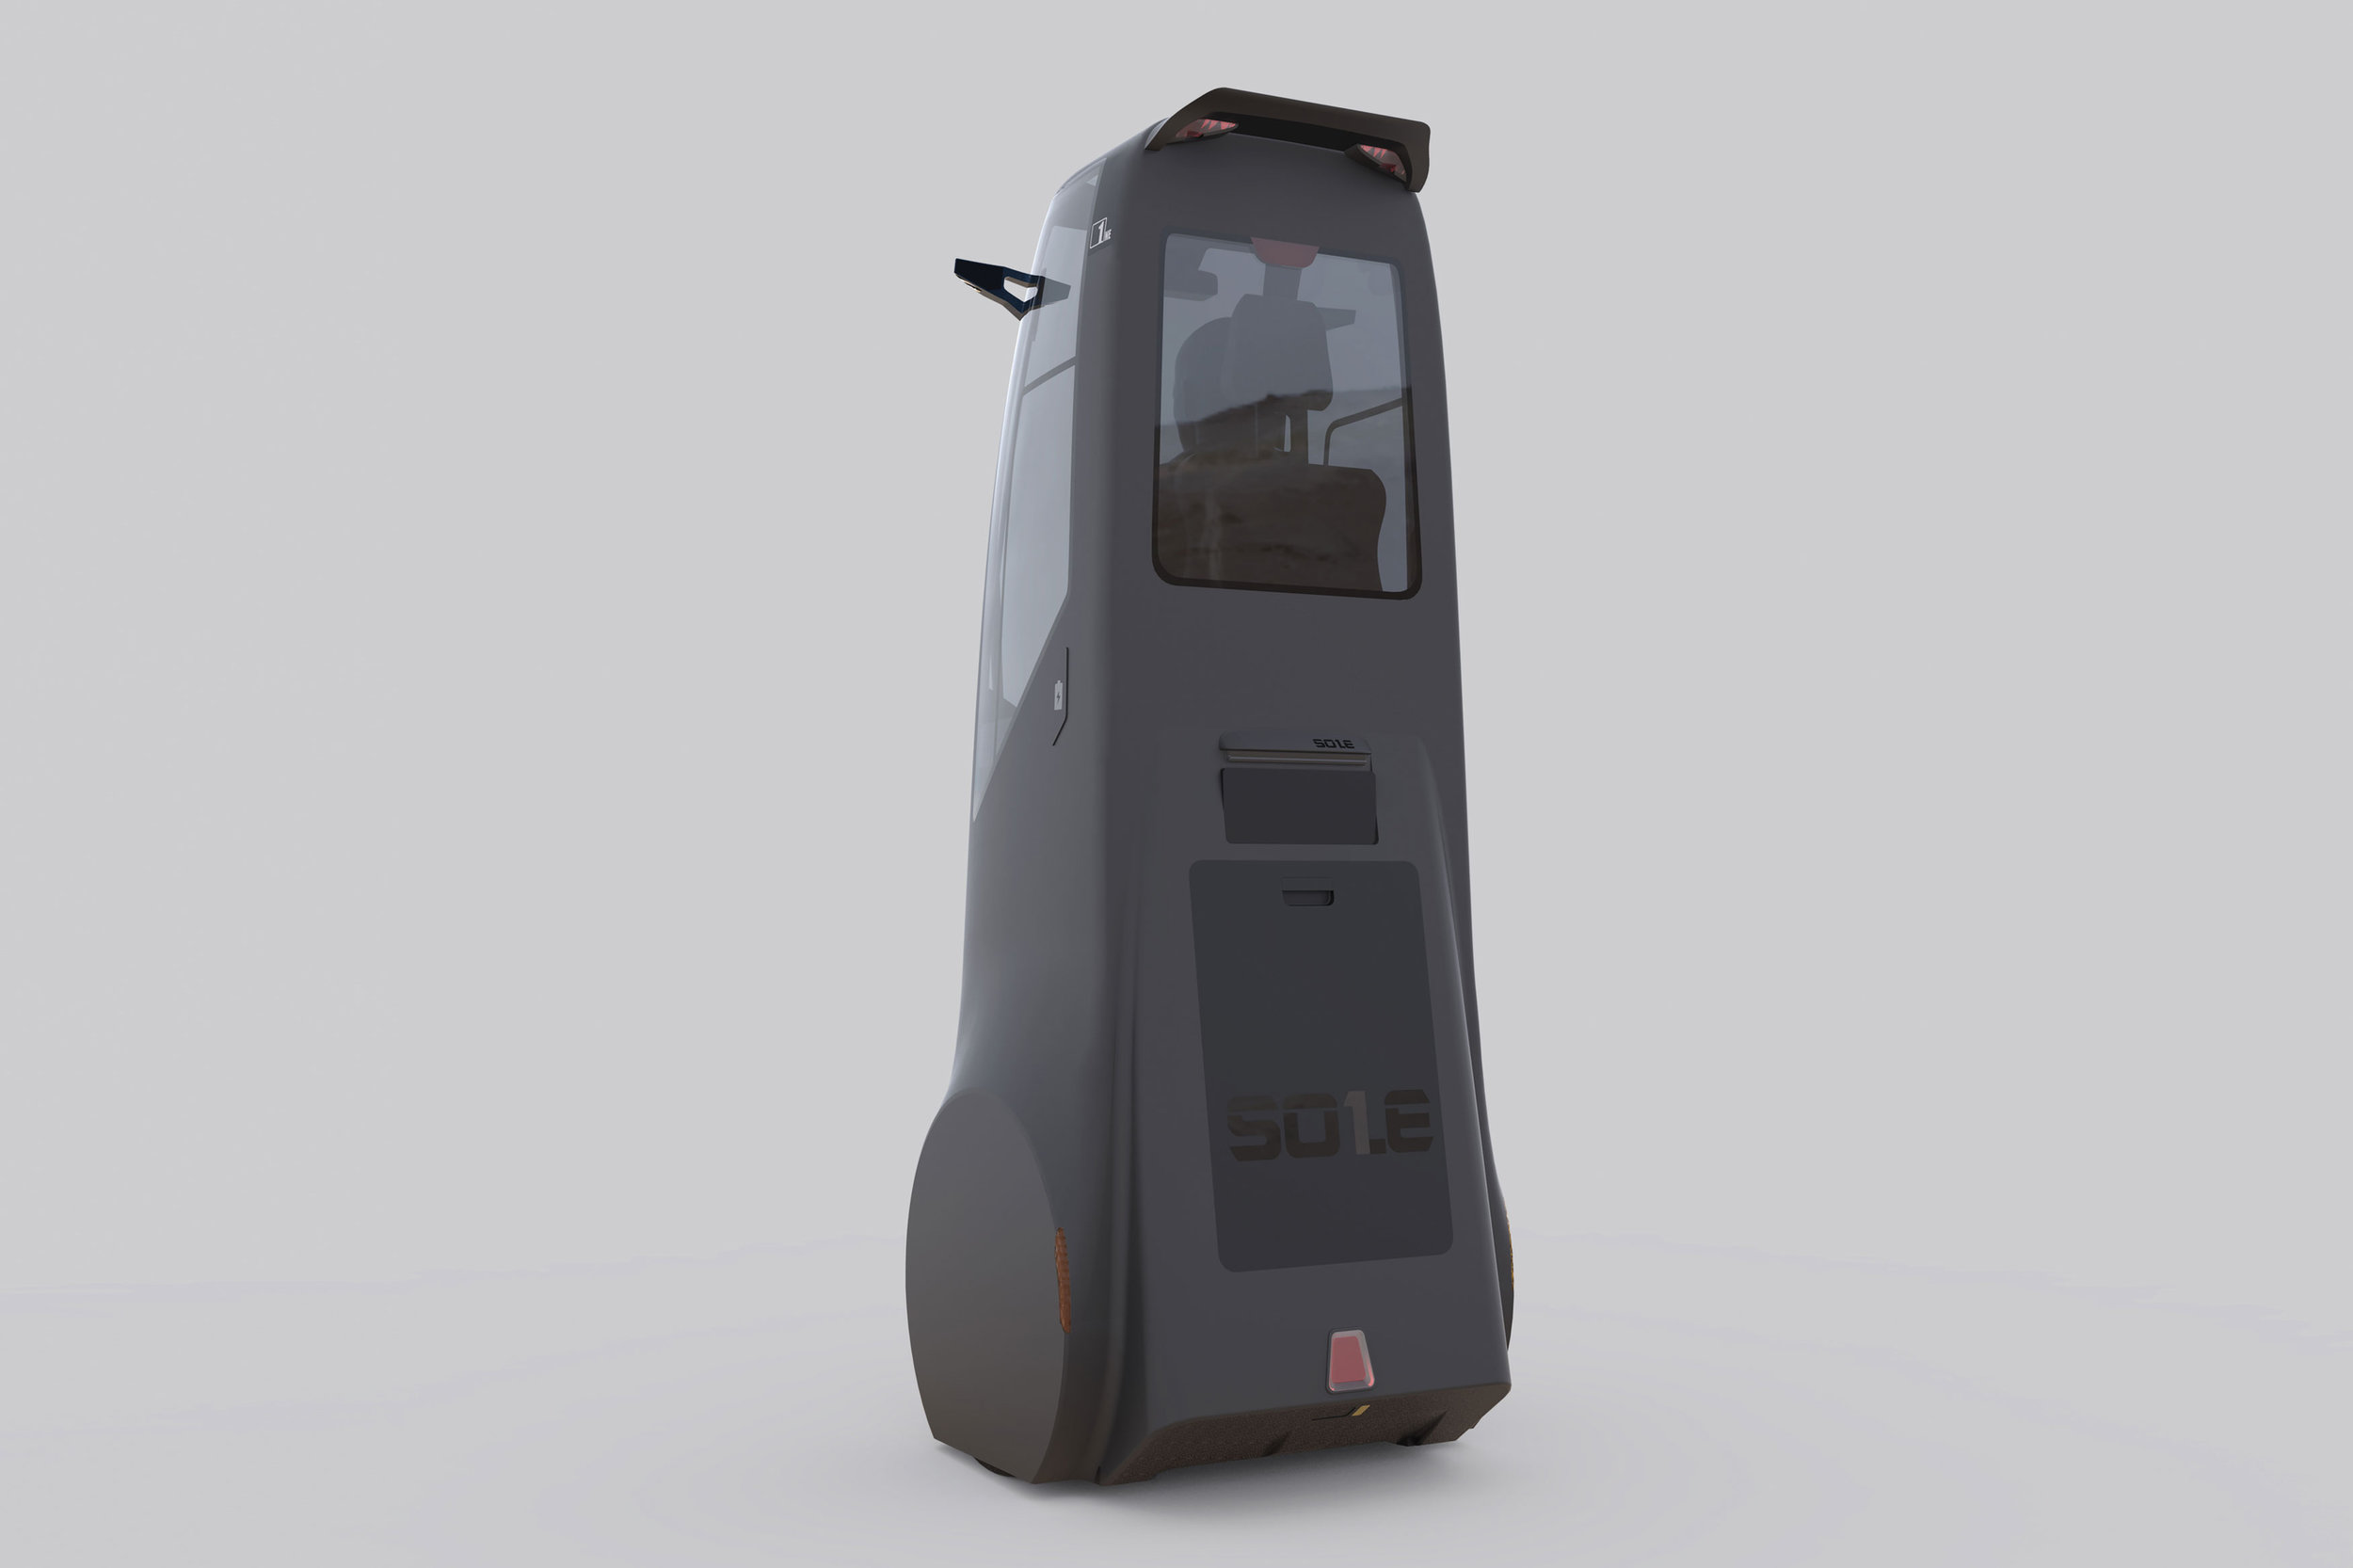 SOLE: THE VERTICAL AUTOMOBILE WINNER OF THE RED DOT DESIGN AWARD